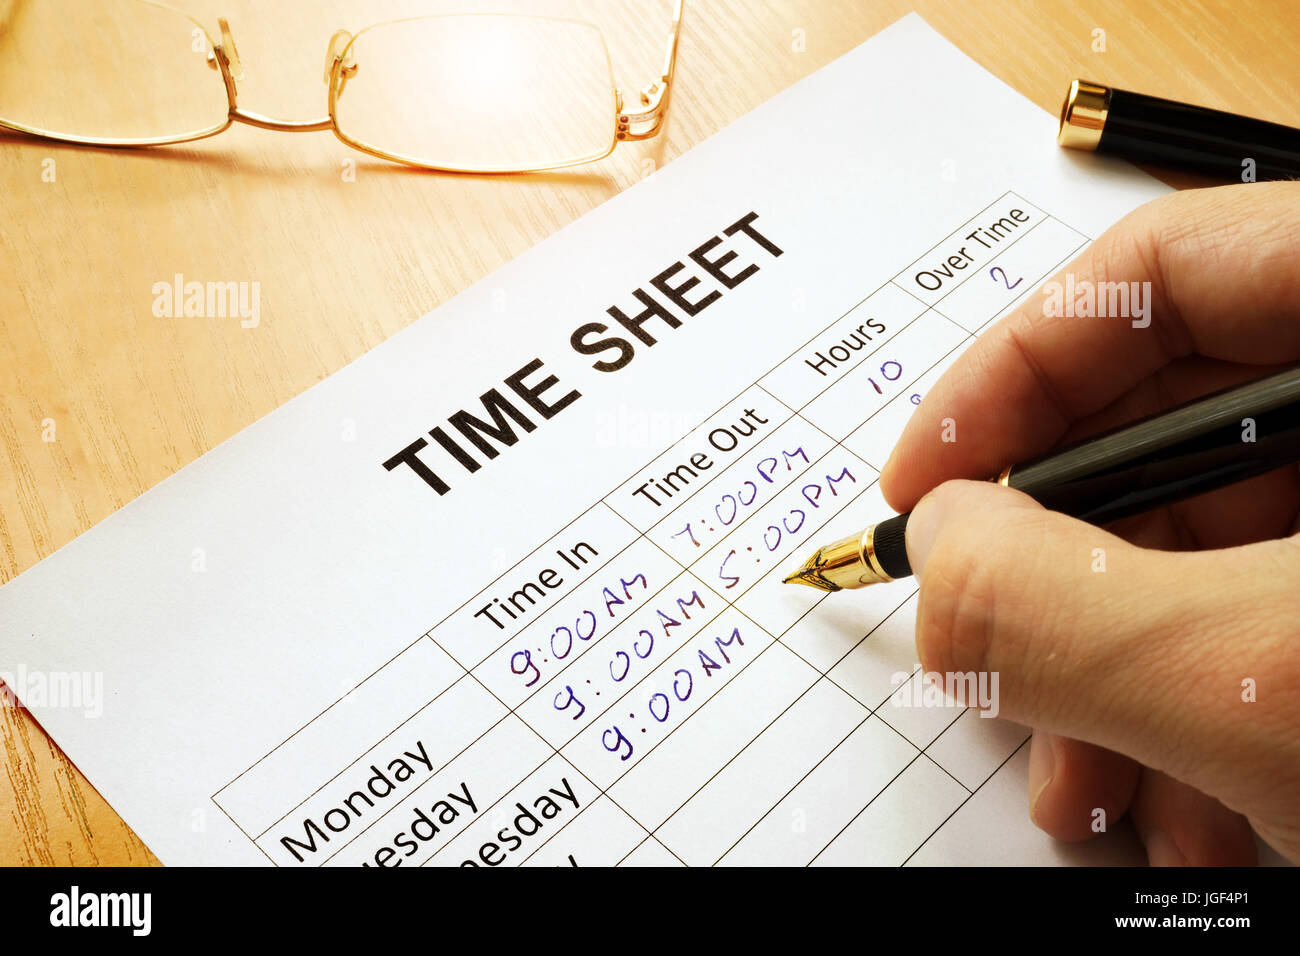 Records work hours in a time sheet. Stock Photo